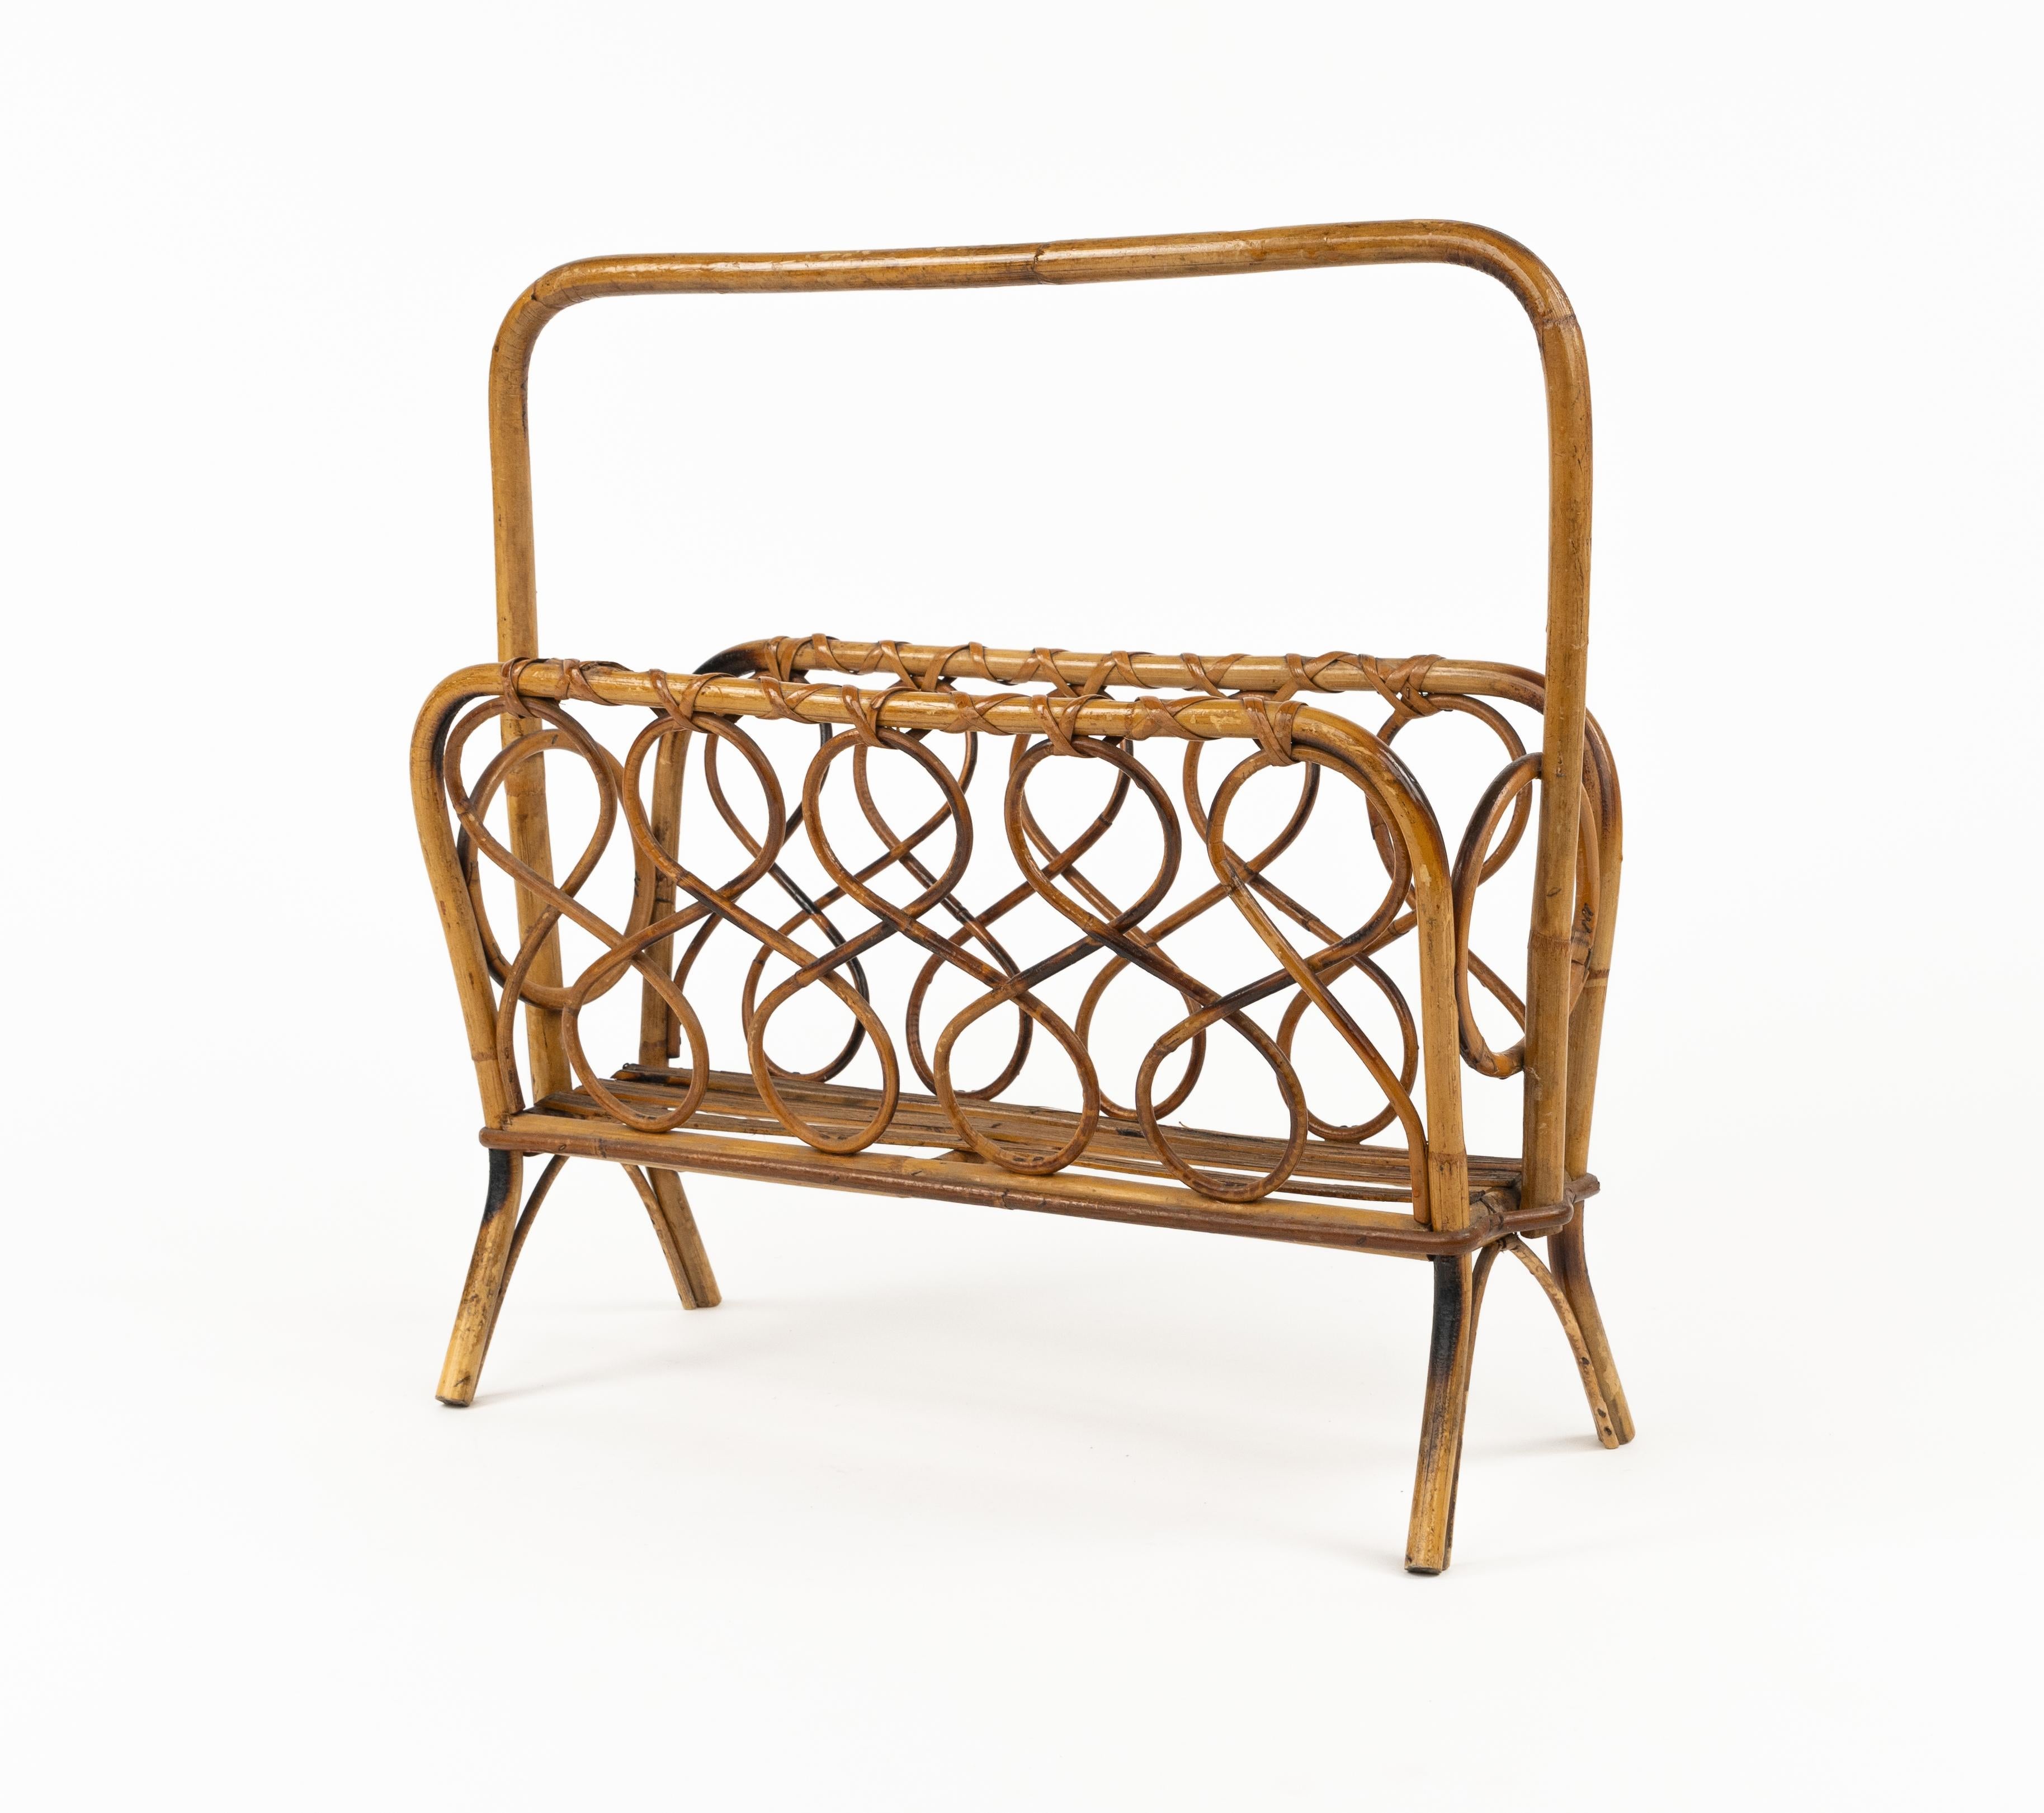 Midcentury Rattan and Bamboo Magazine Rack, Italy 1960s For Sale 4